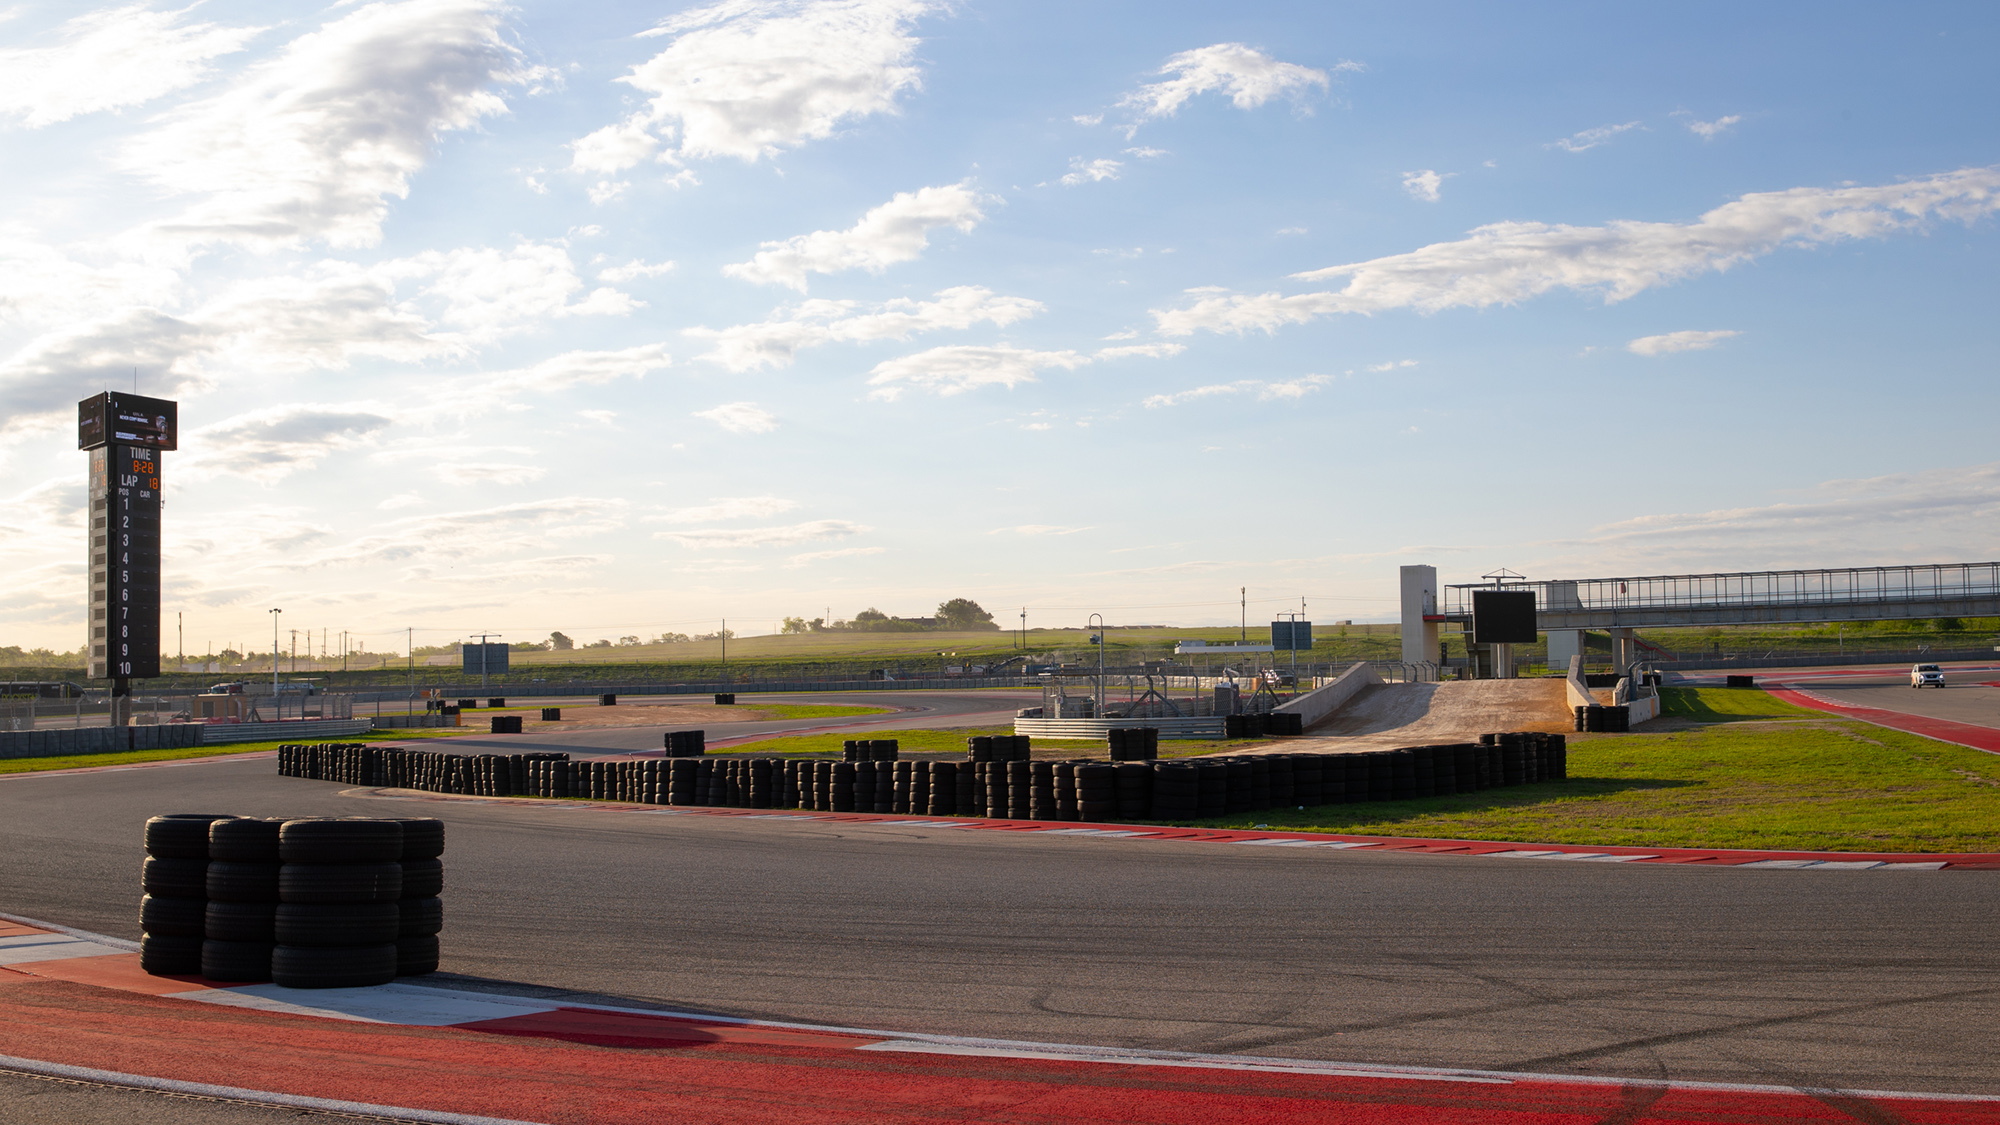 The FIA World Rallycross Championship comes to the States at COTA